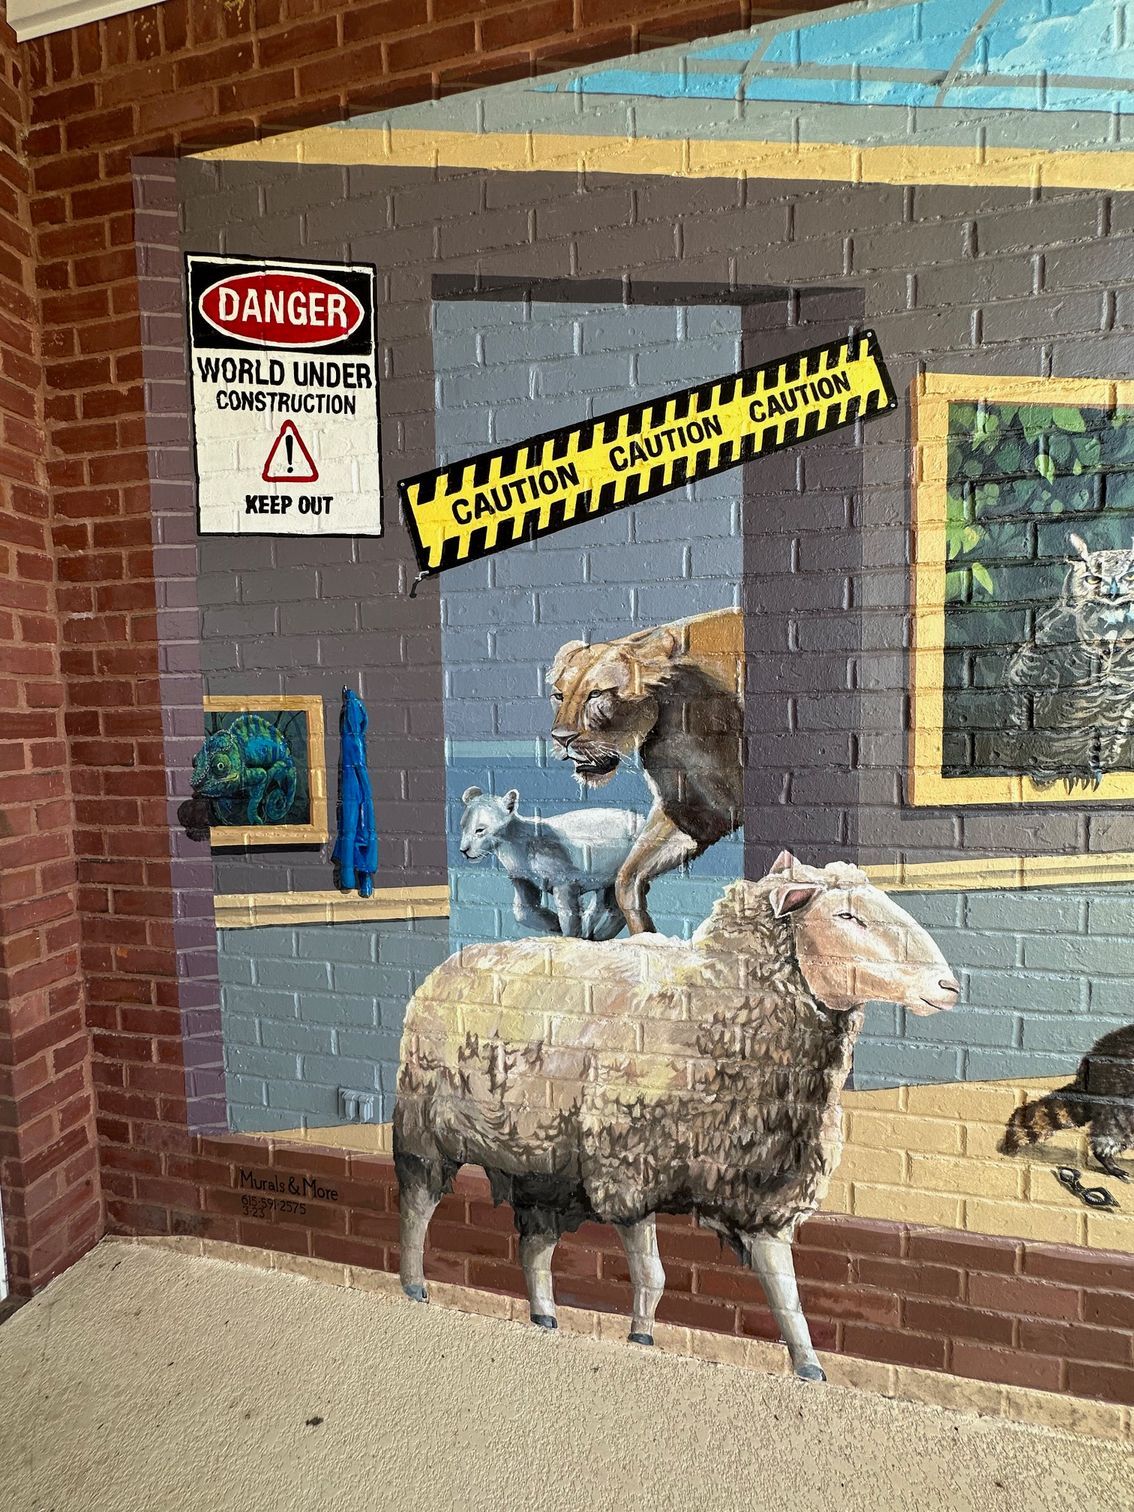 Animals on the Right of Painting Characters in Her Books Painted on This Exterior Brick Wall - Exterior and Residential Mural Art